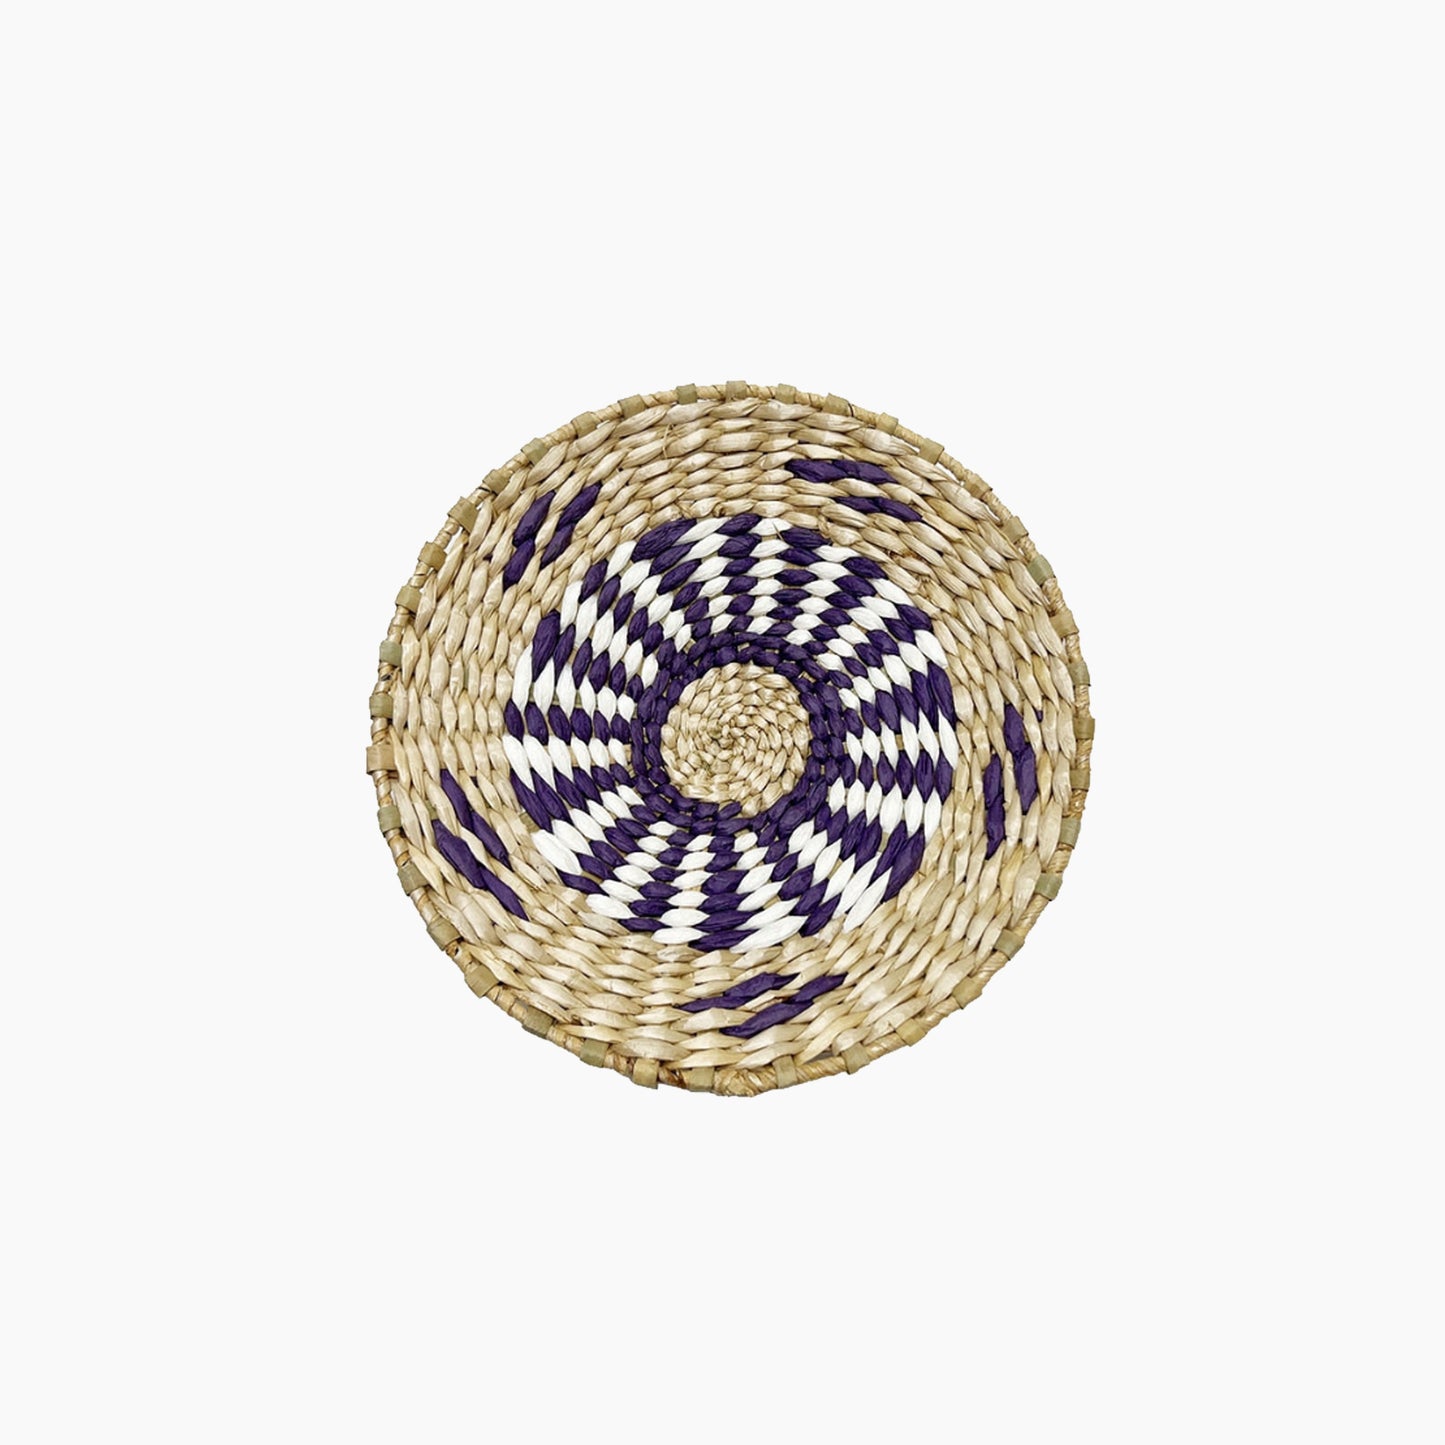 Straw Hand-Woven Papyrus Wall Hanging Decoration